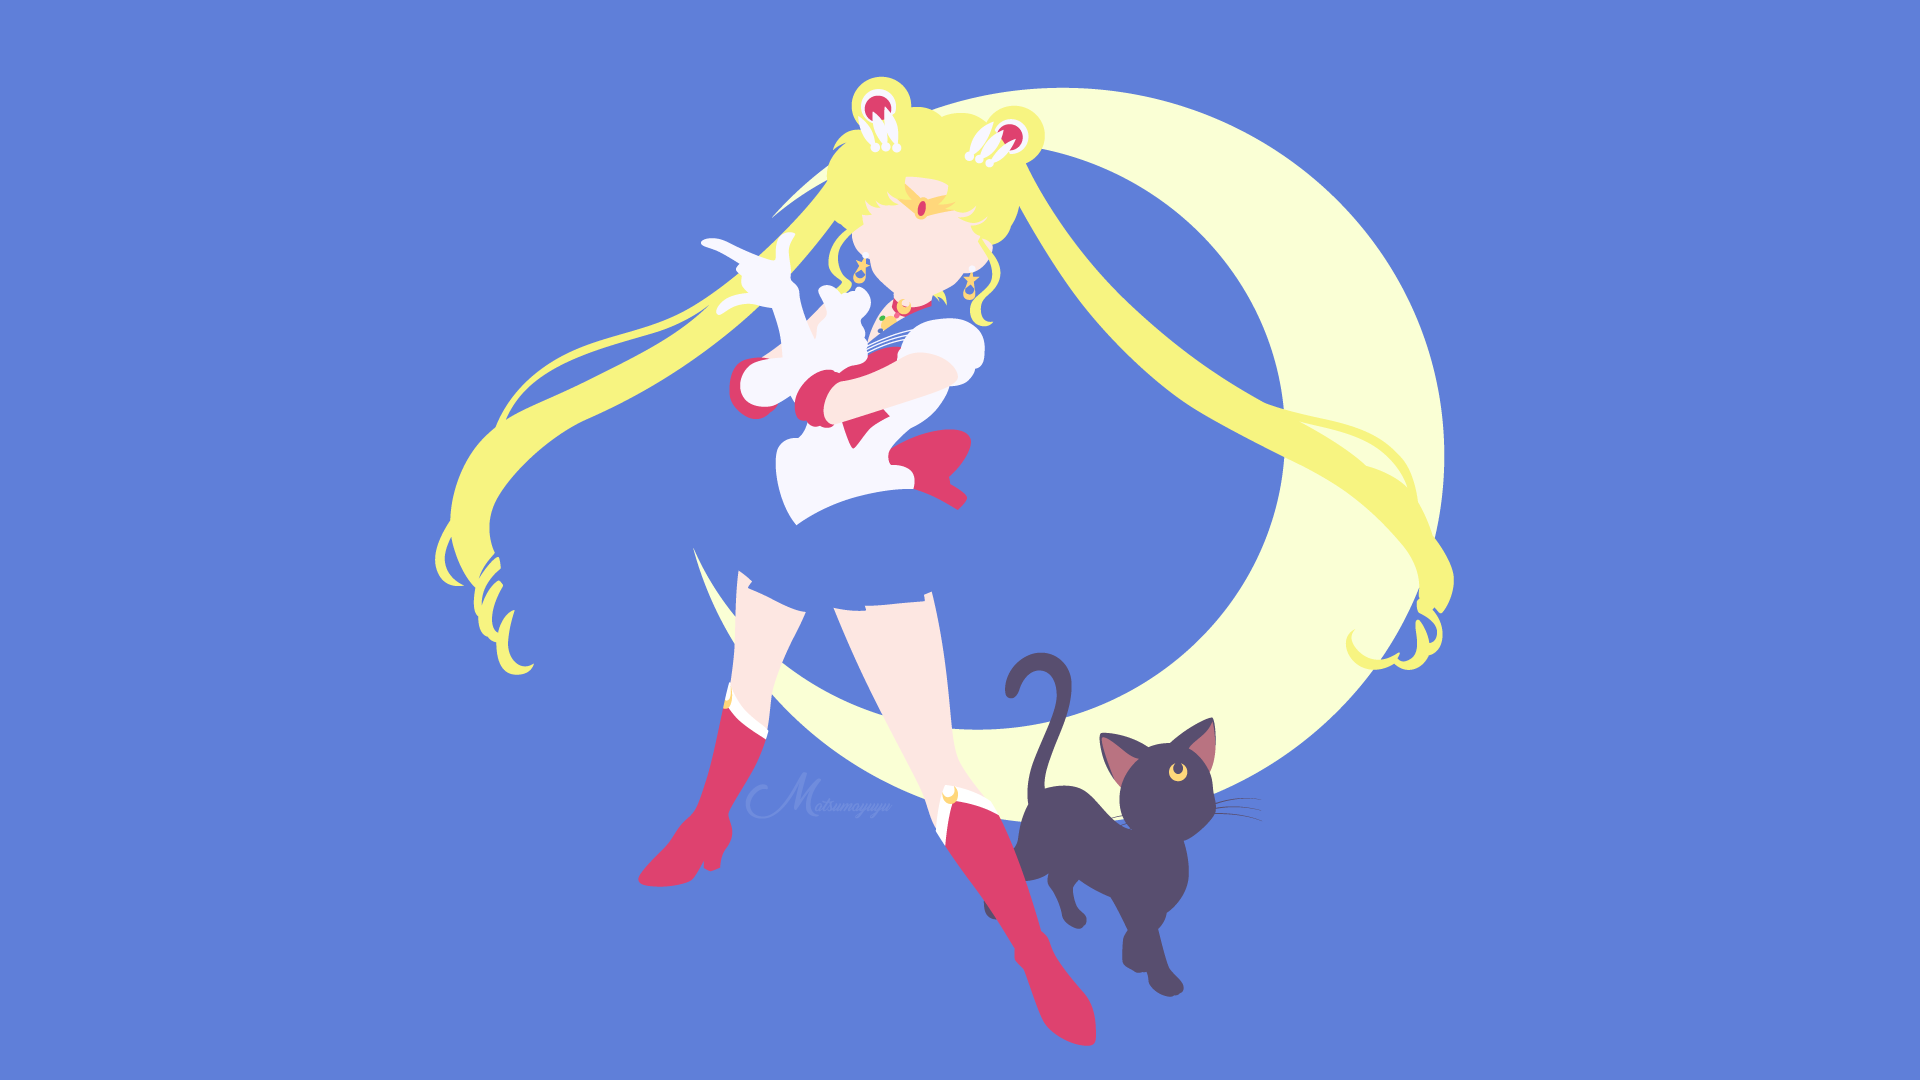 Sailor Moon Background Png & Free Sailor Moon Background.png